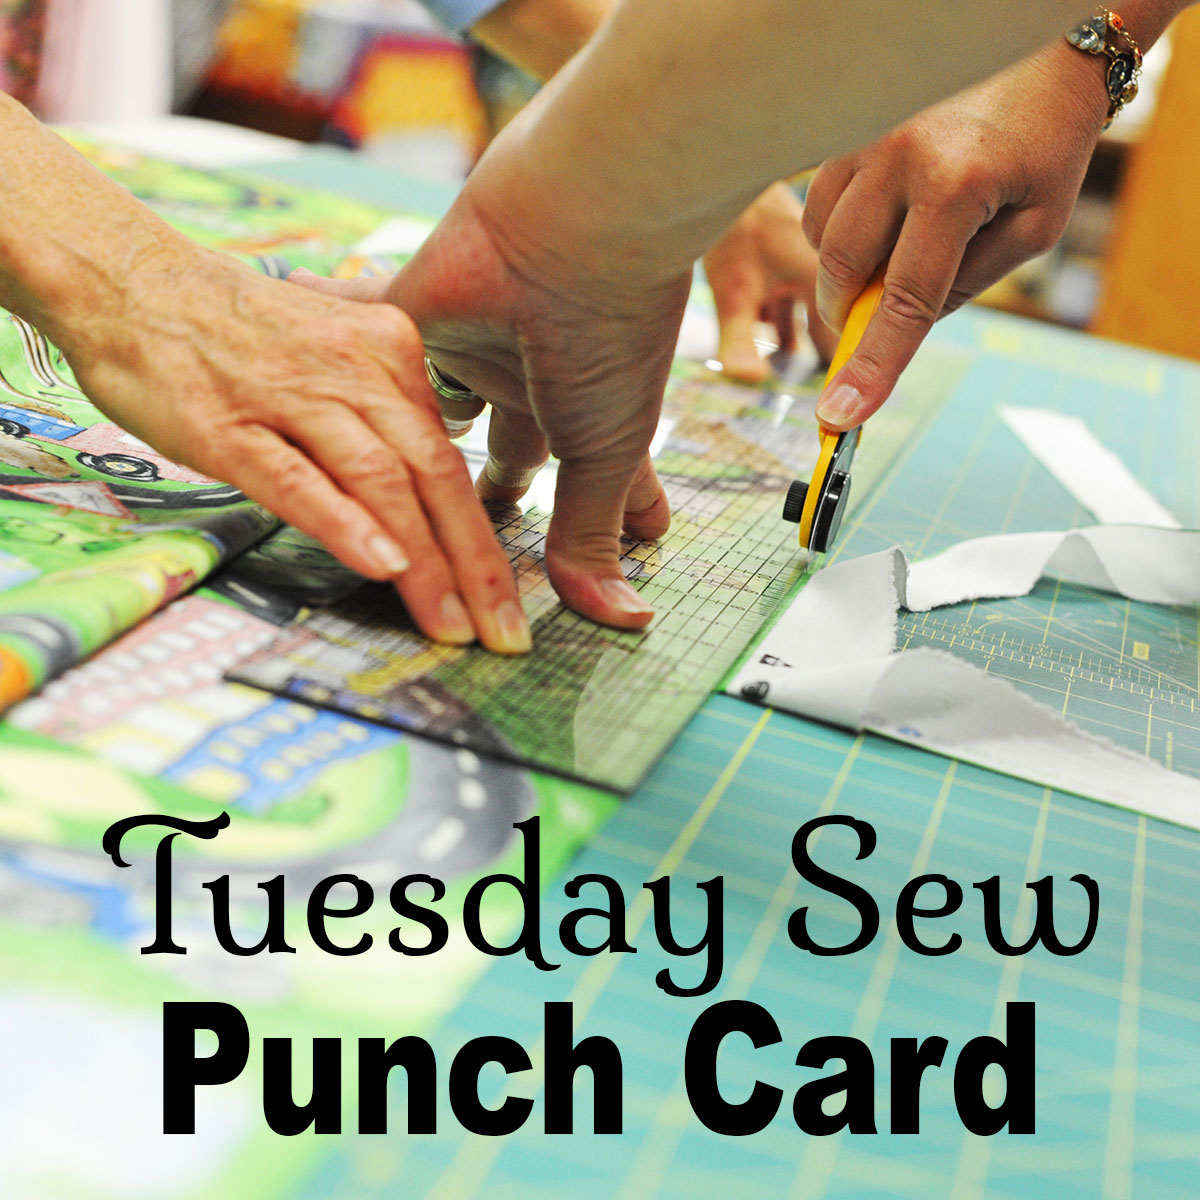 Tuesday Sew Punch Card